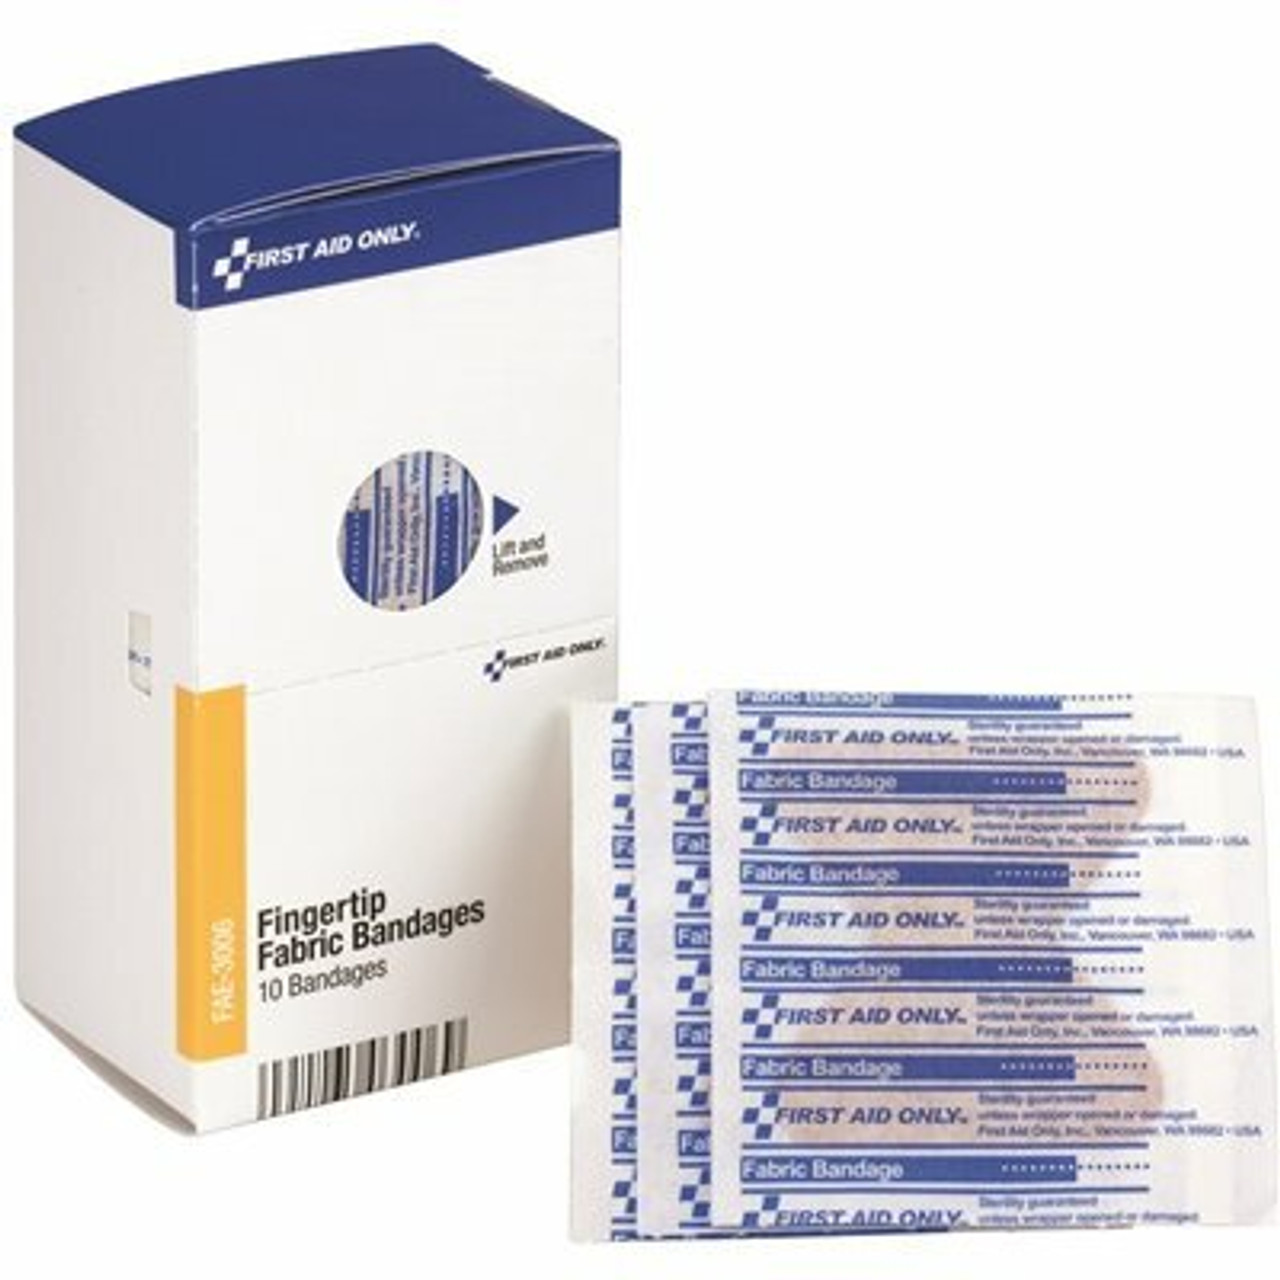 Smartcompliance Fingertip Fabric Bandages Refill (10 Per Box)